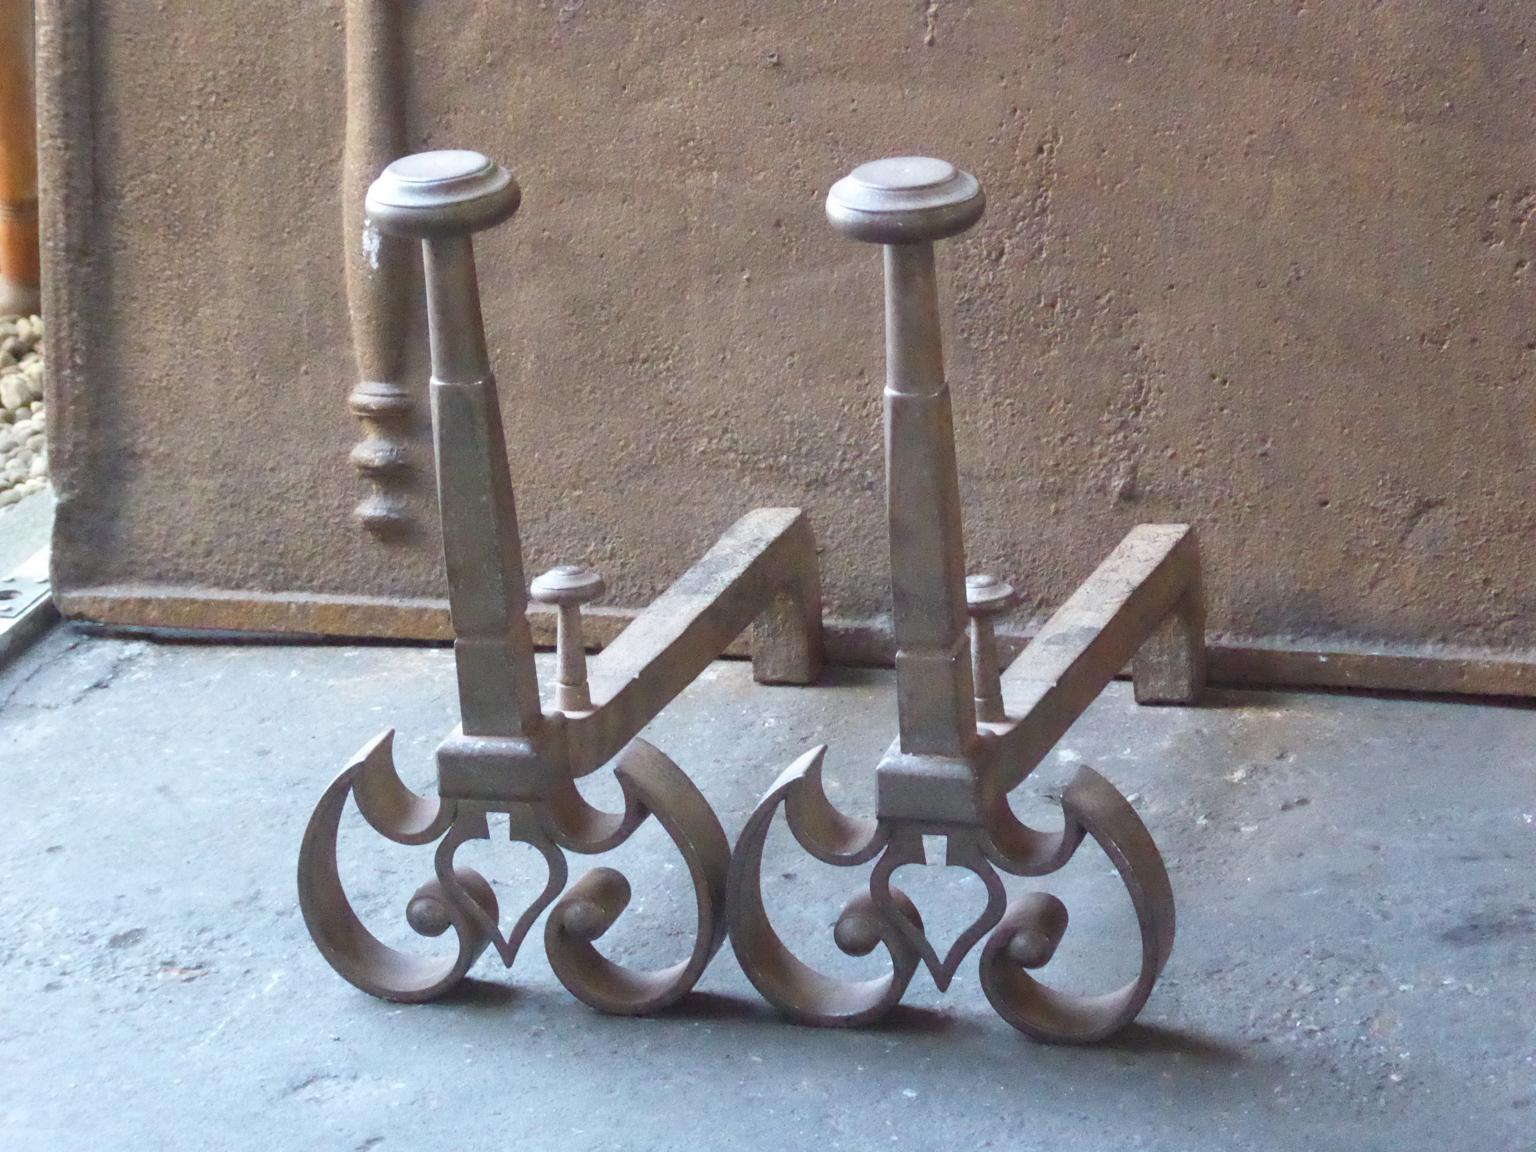 20th century French andirons made of wrought iron. The style of the andirons is Louis XV. They are in a good condition.